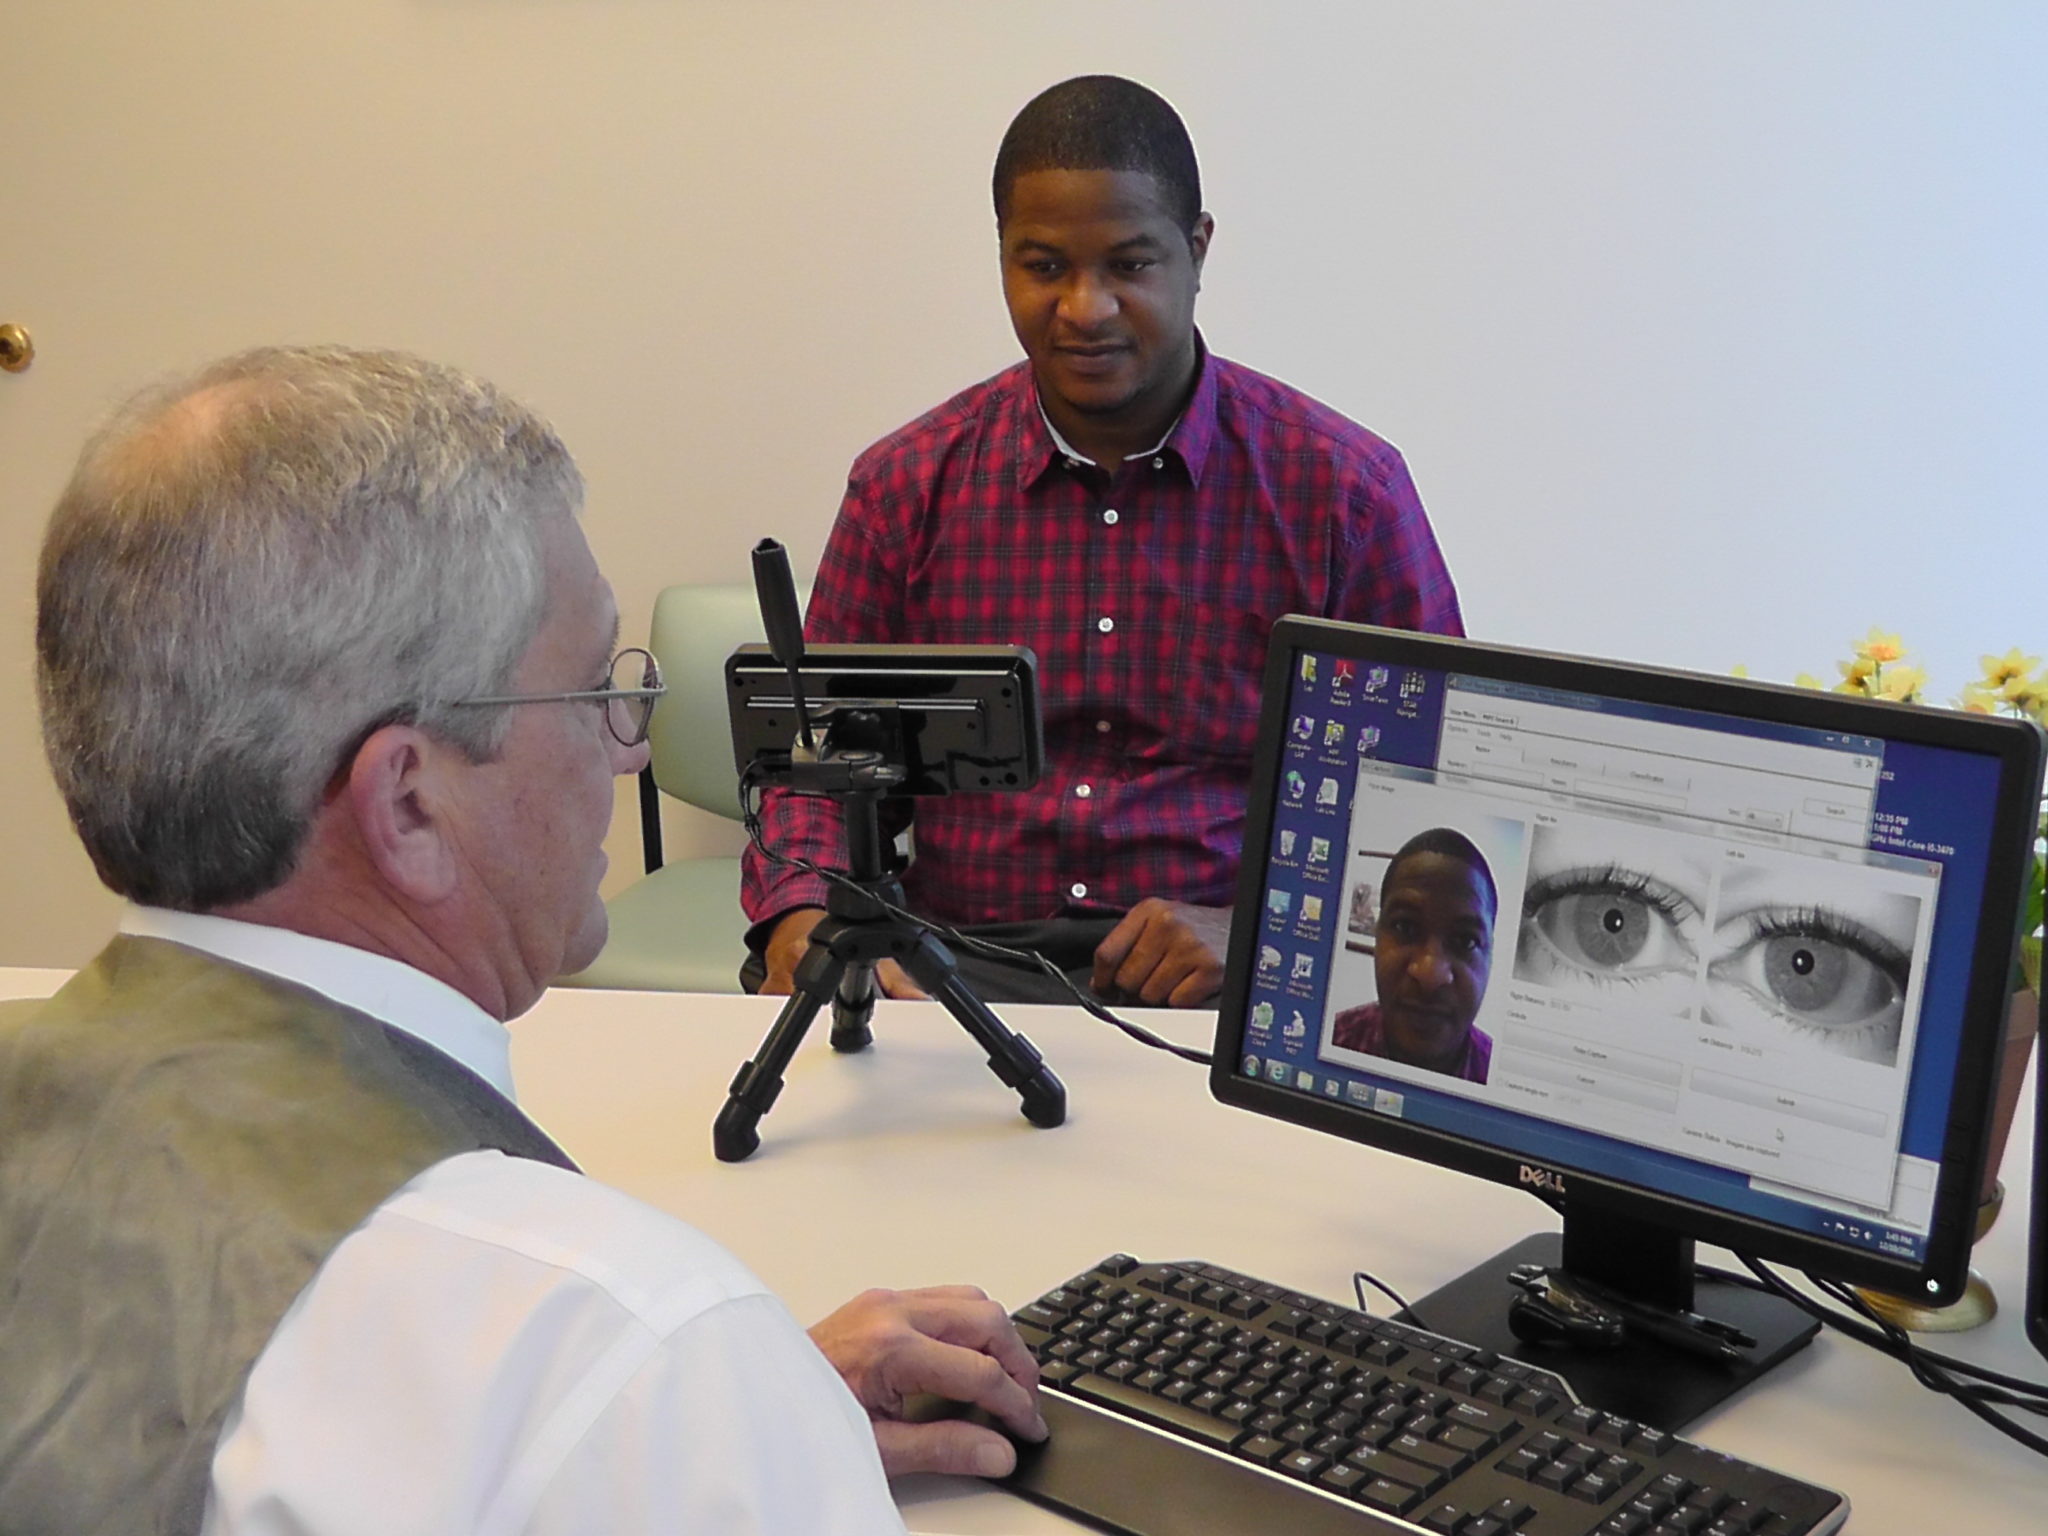 using iris biometrics for patient identification helps increase patient safety